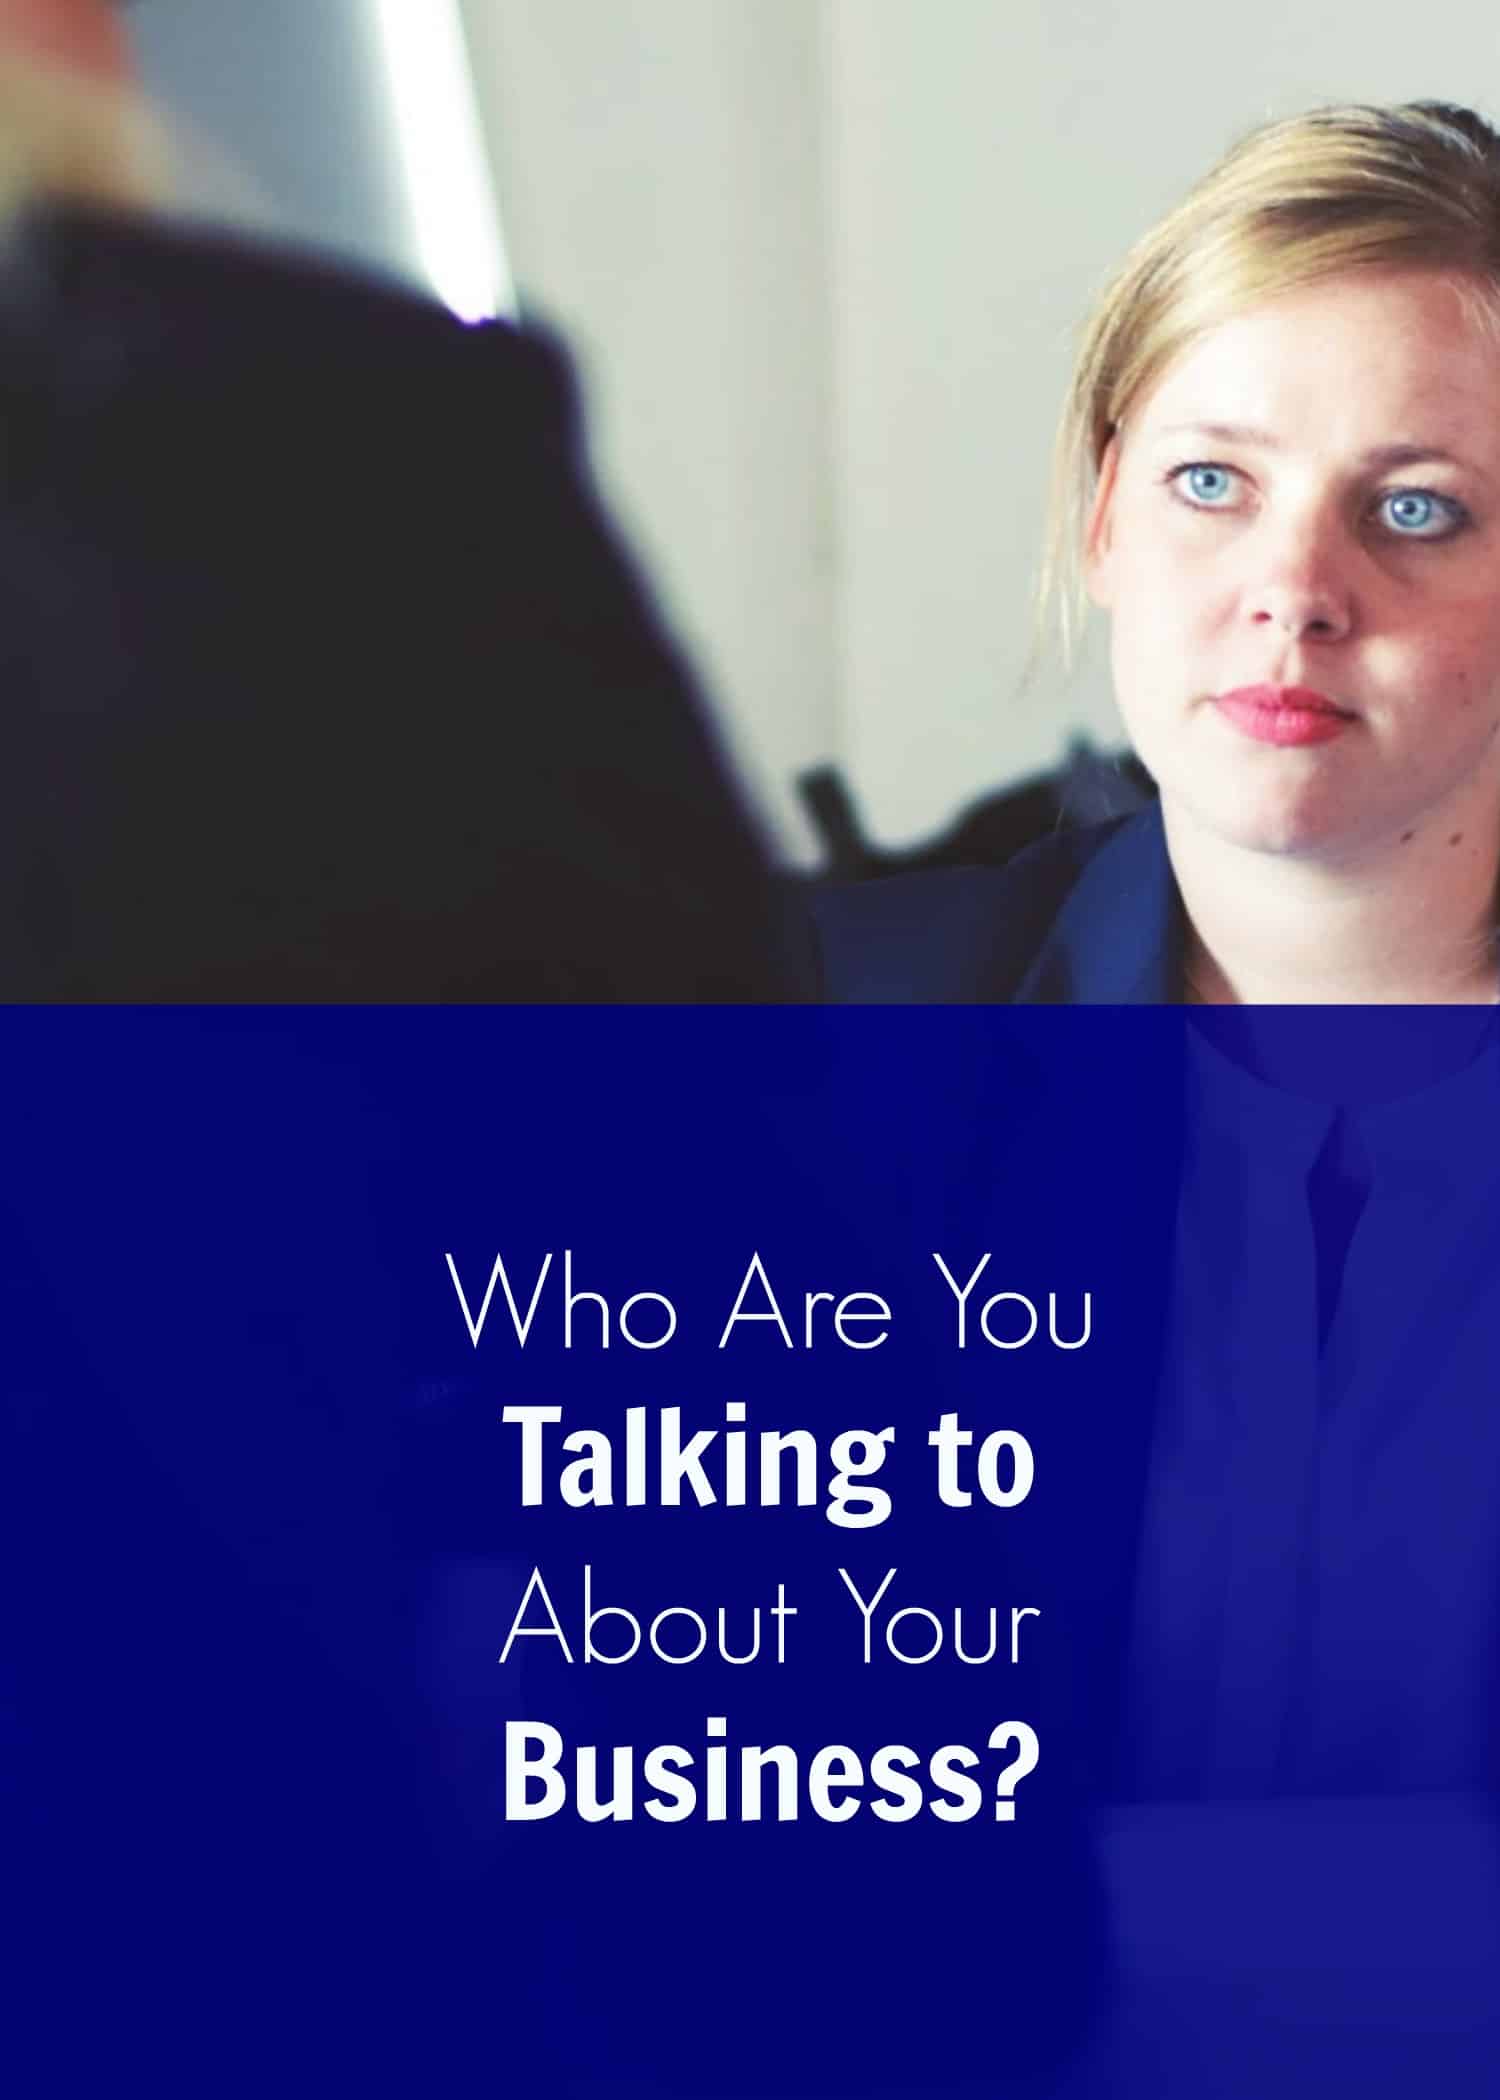 Who are you talking to about your business?